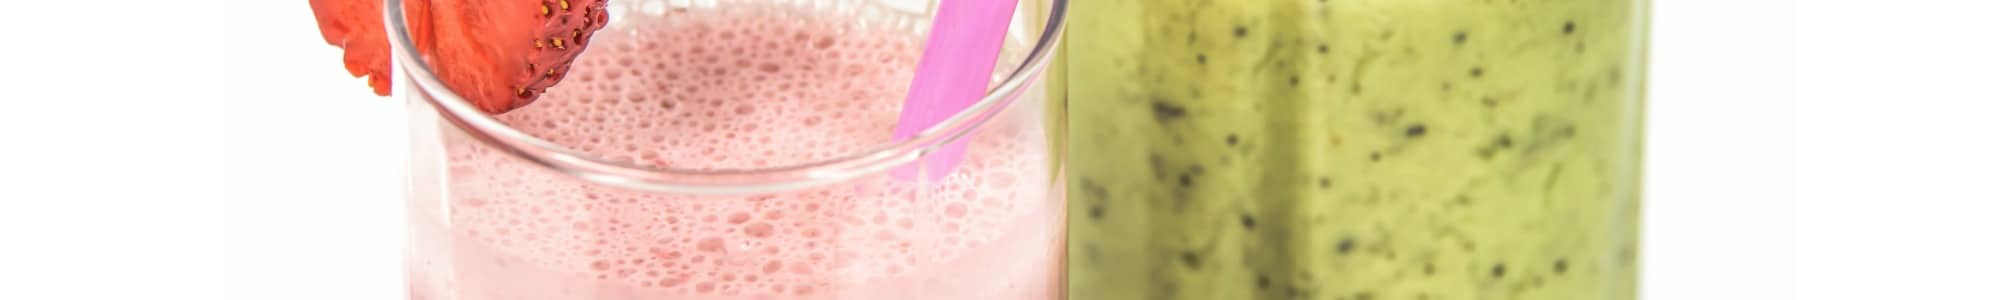 Smoothies banner image